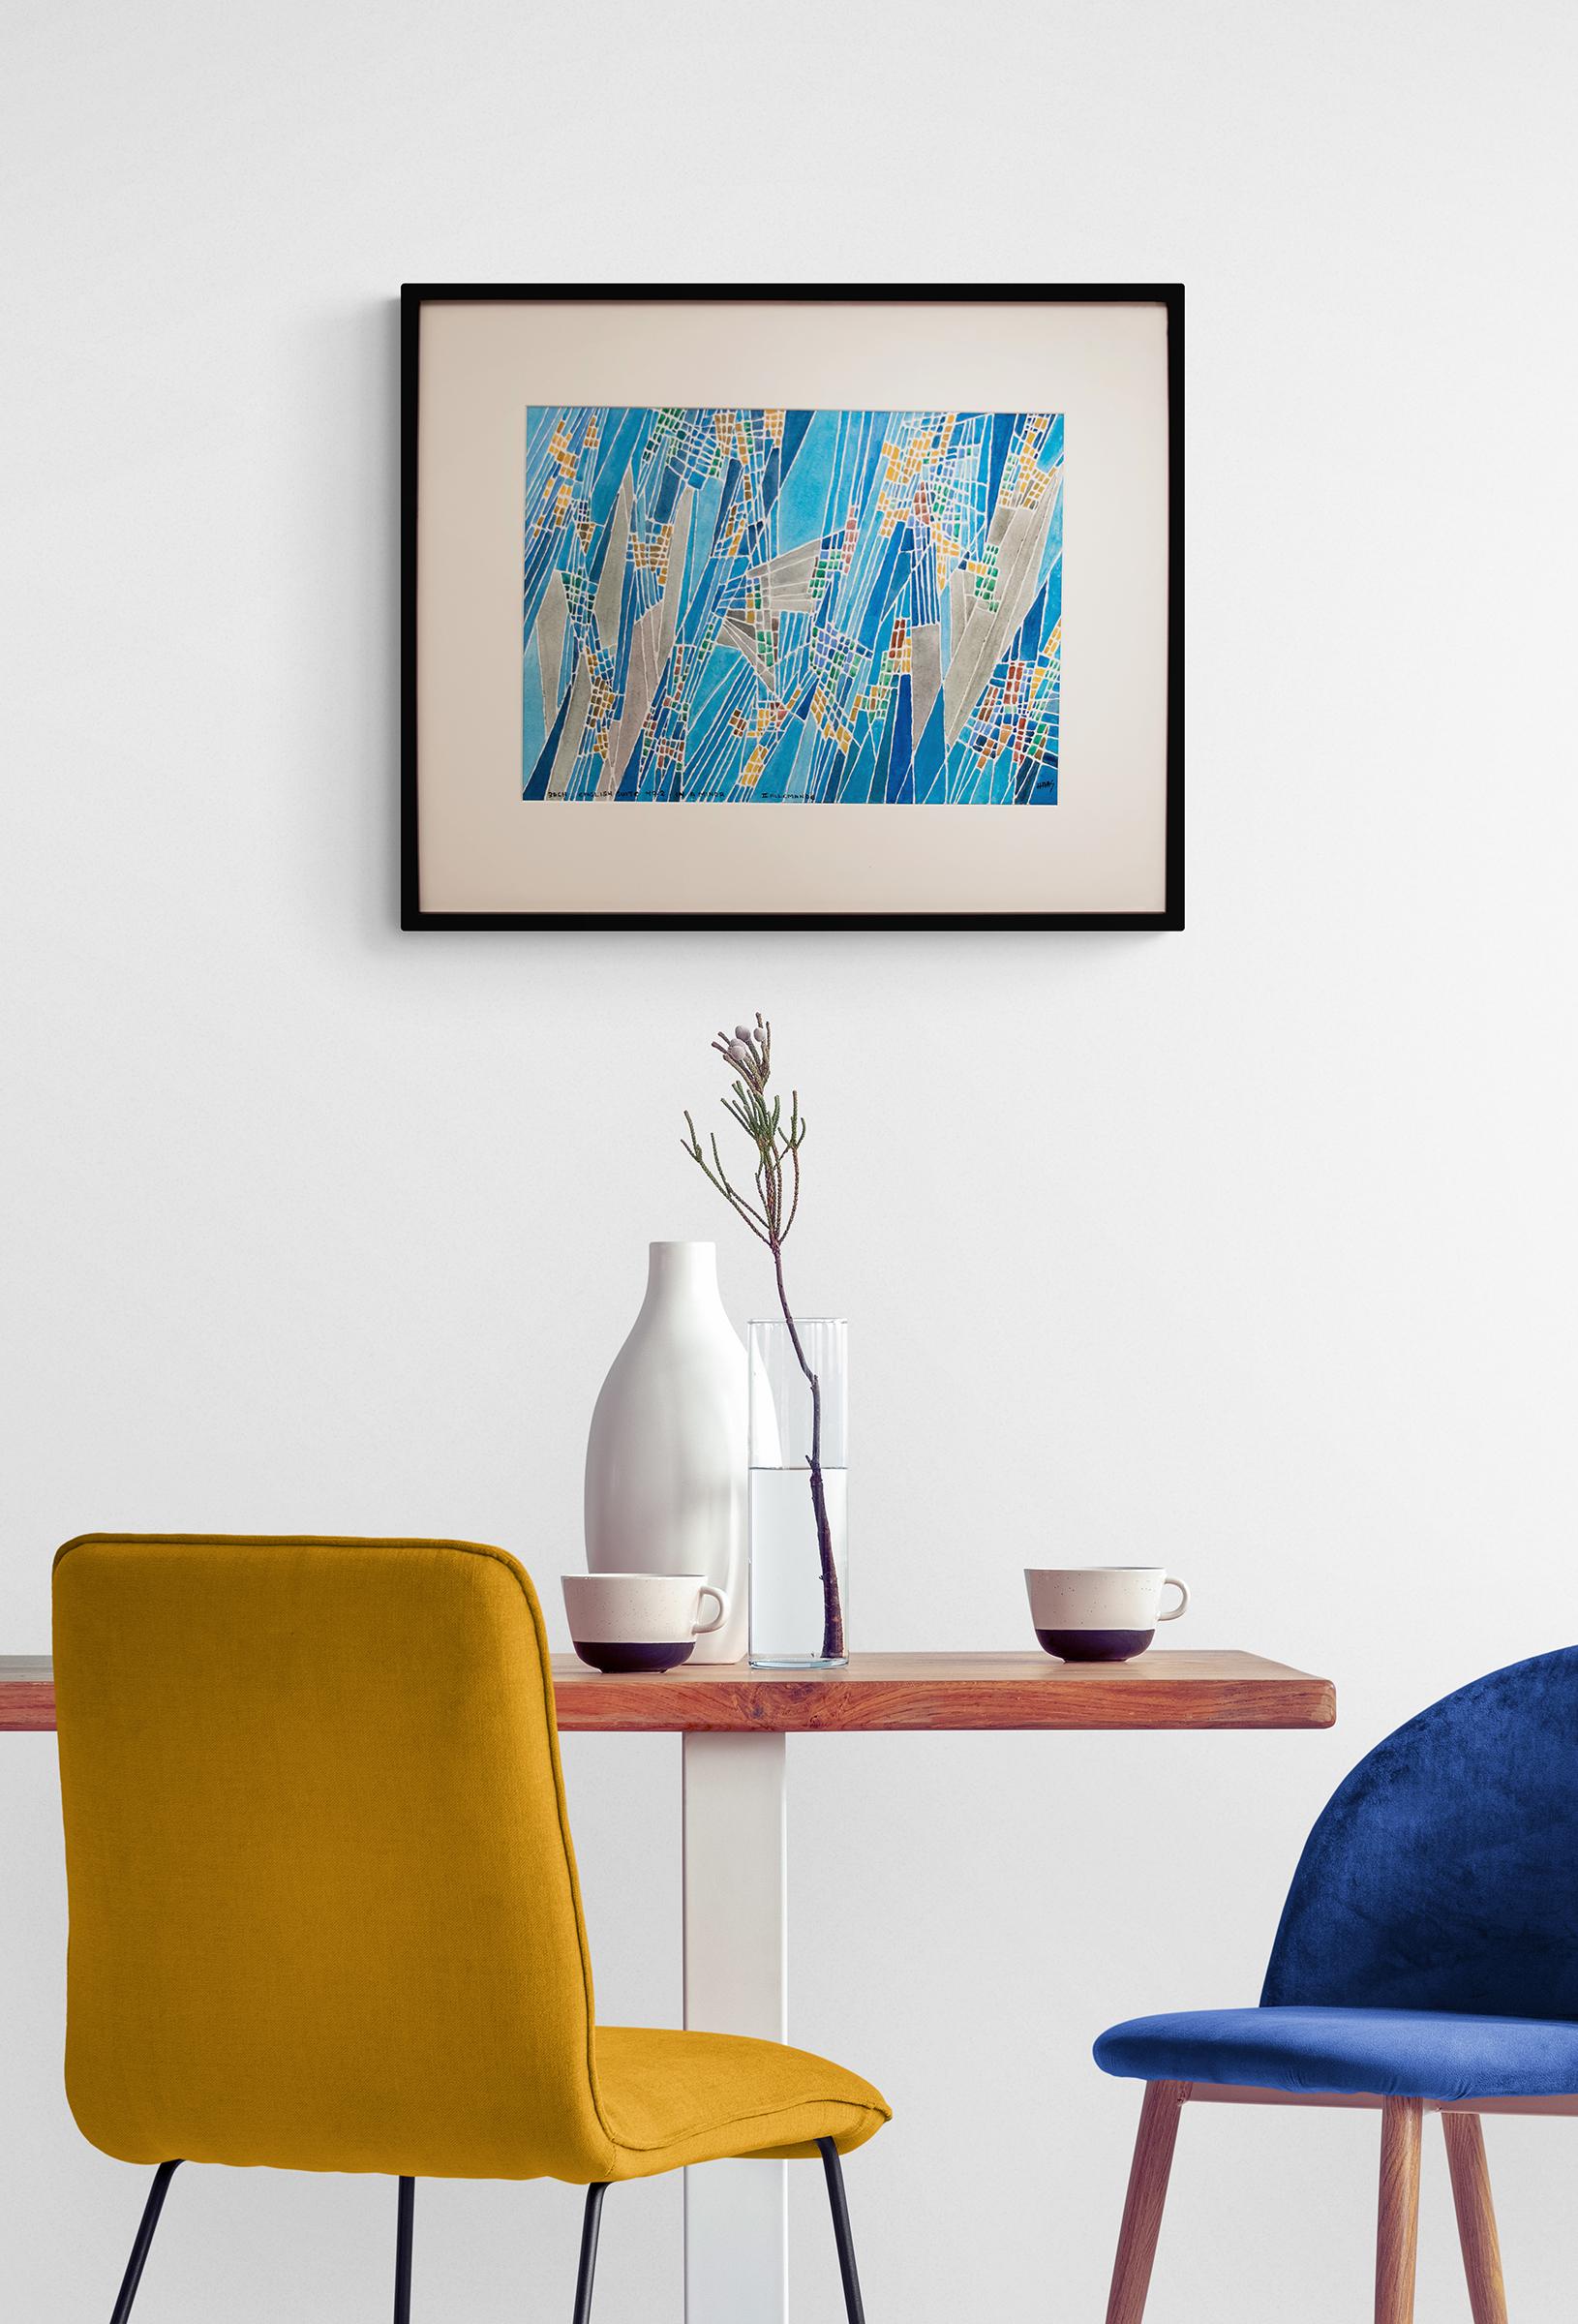 Abstract Composition Inspired by Bach, Framed Abstract Watercolor Painting - Art by Hildegarde Haas